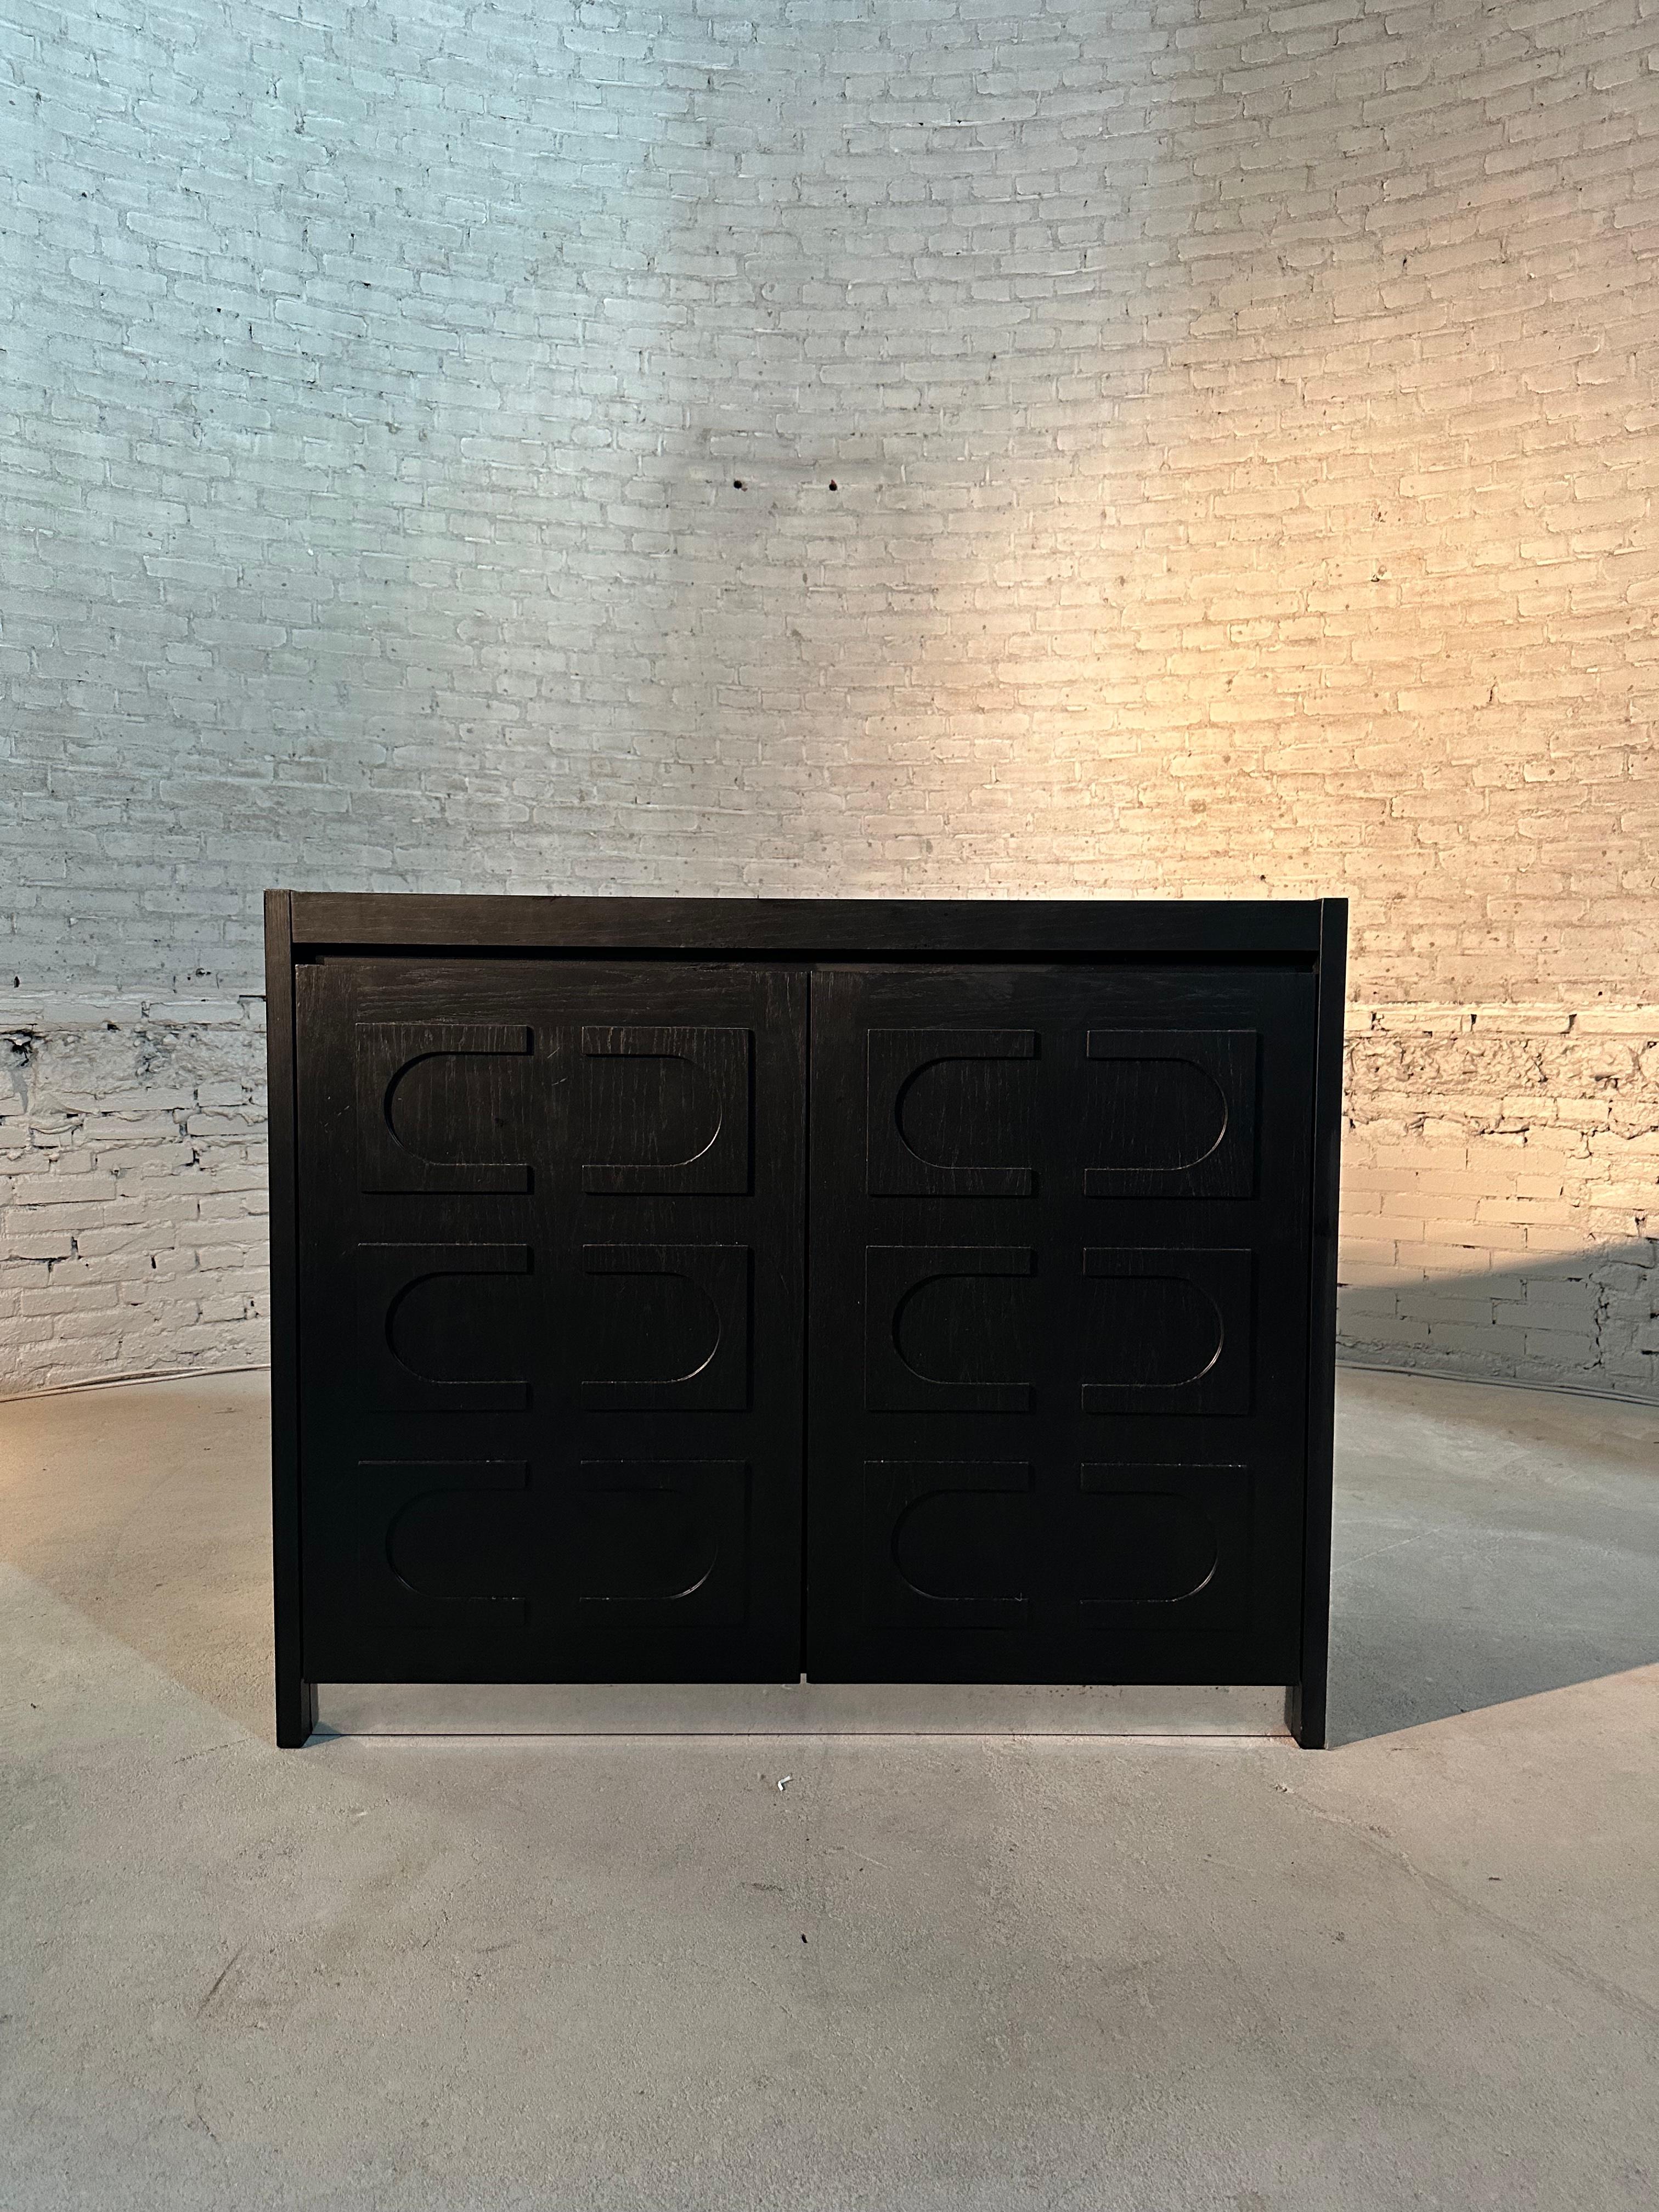 A brutalist De Coene cabinet in black stained oak with two patterned doors, made in Belgium in the 1970s. Behind the patterned doors, this cabinet reveals plenty of storage space. It’s a storage piece that includes three drawers at the bottom right.